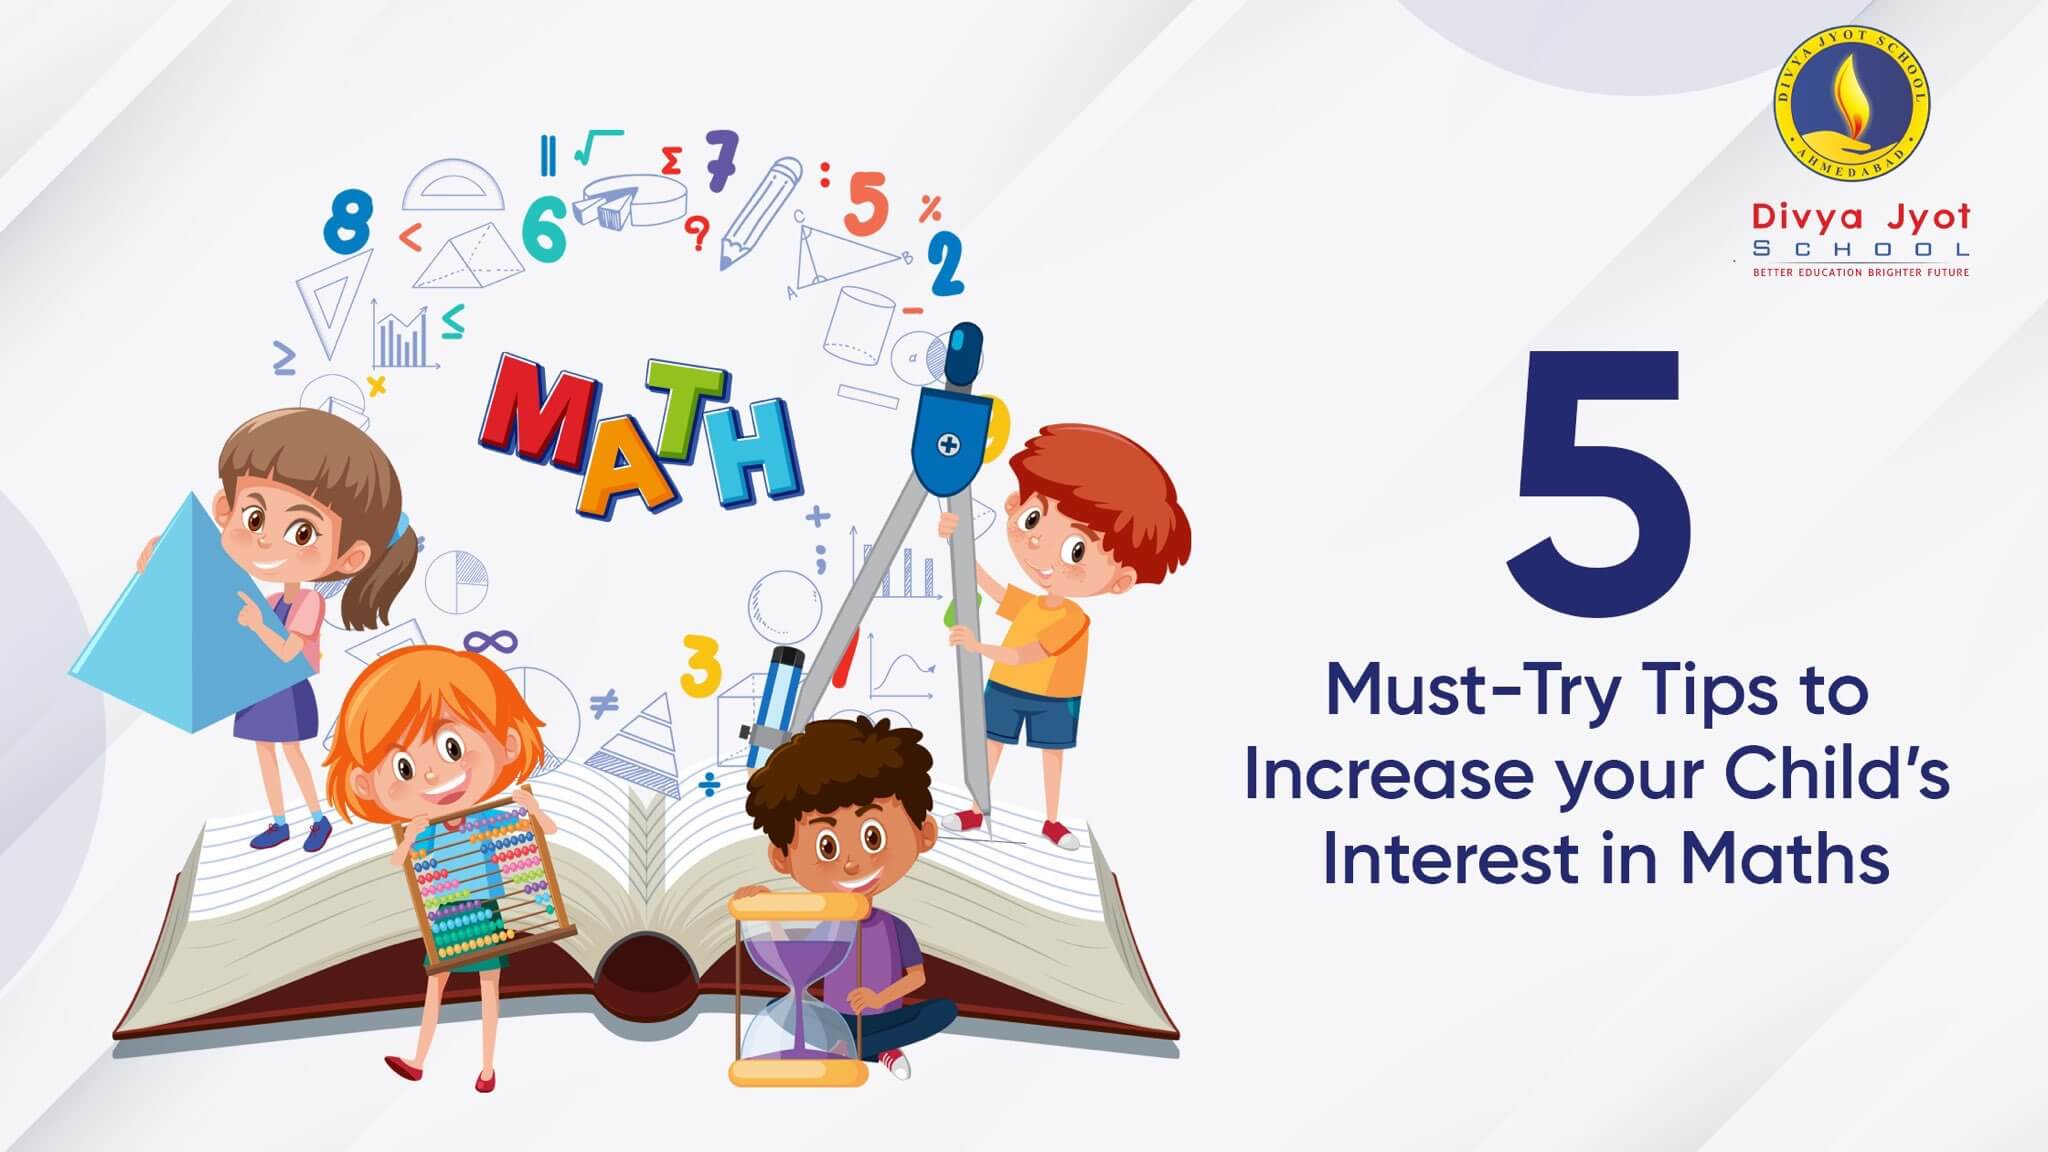 5 Must-Try tips to increase your child’s interest in Maths